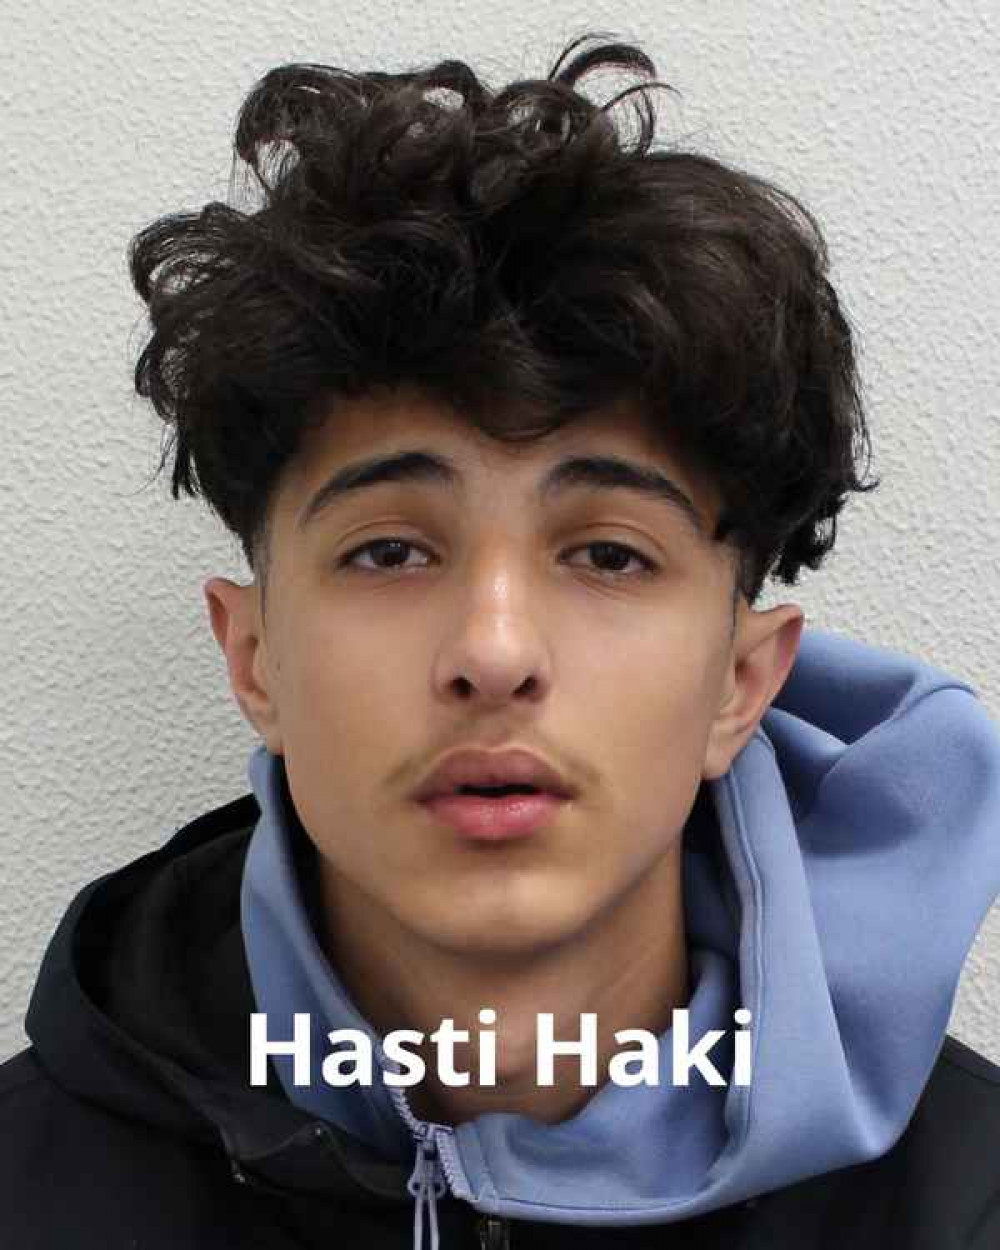 Hasti Haki was sentenced to a 12-month conditional discharge. Image Credit: Ealing Police